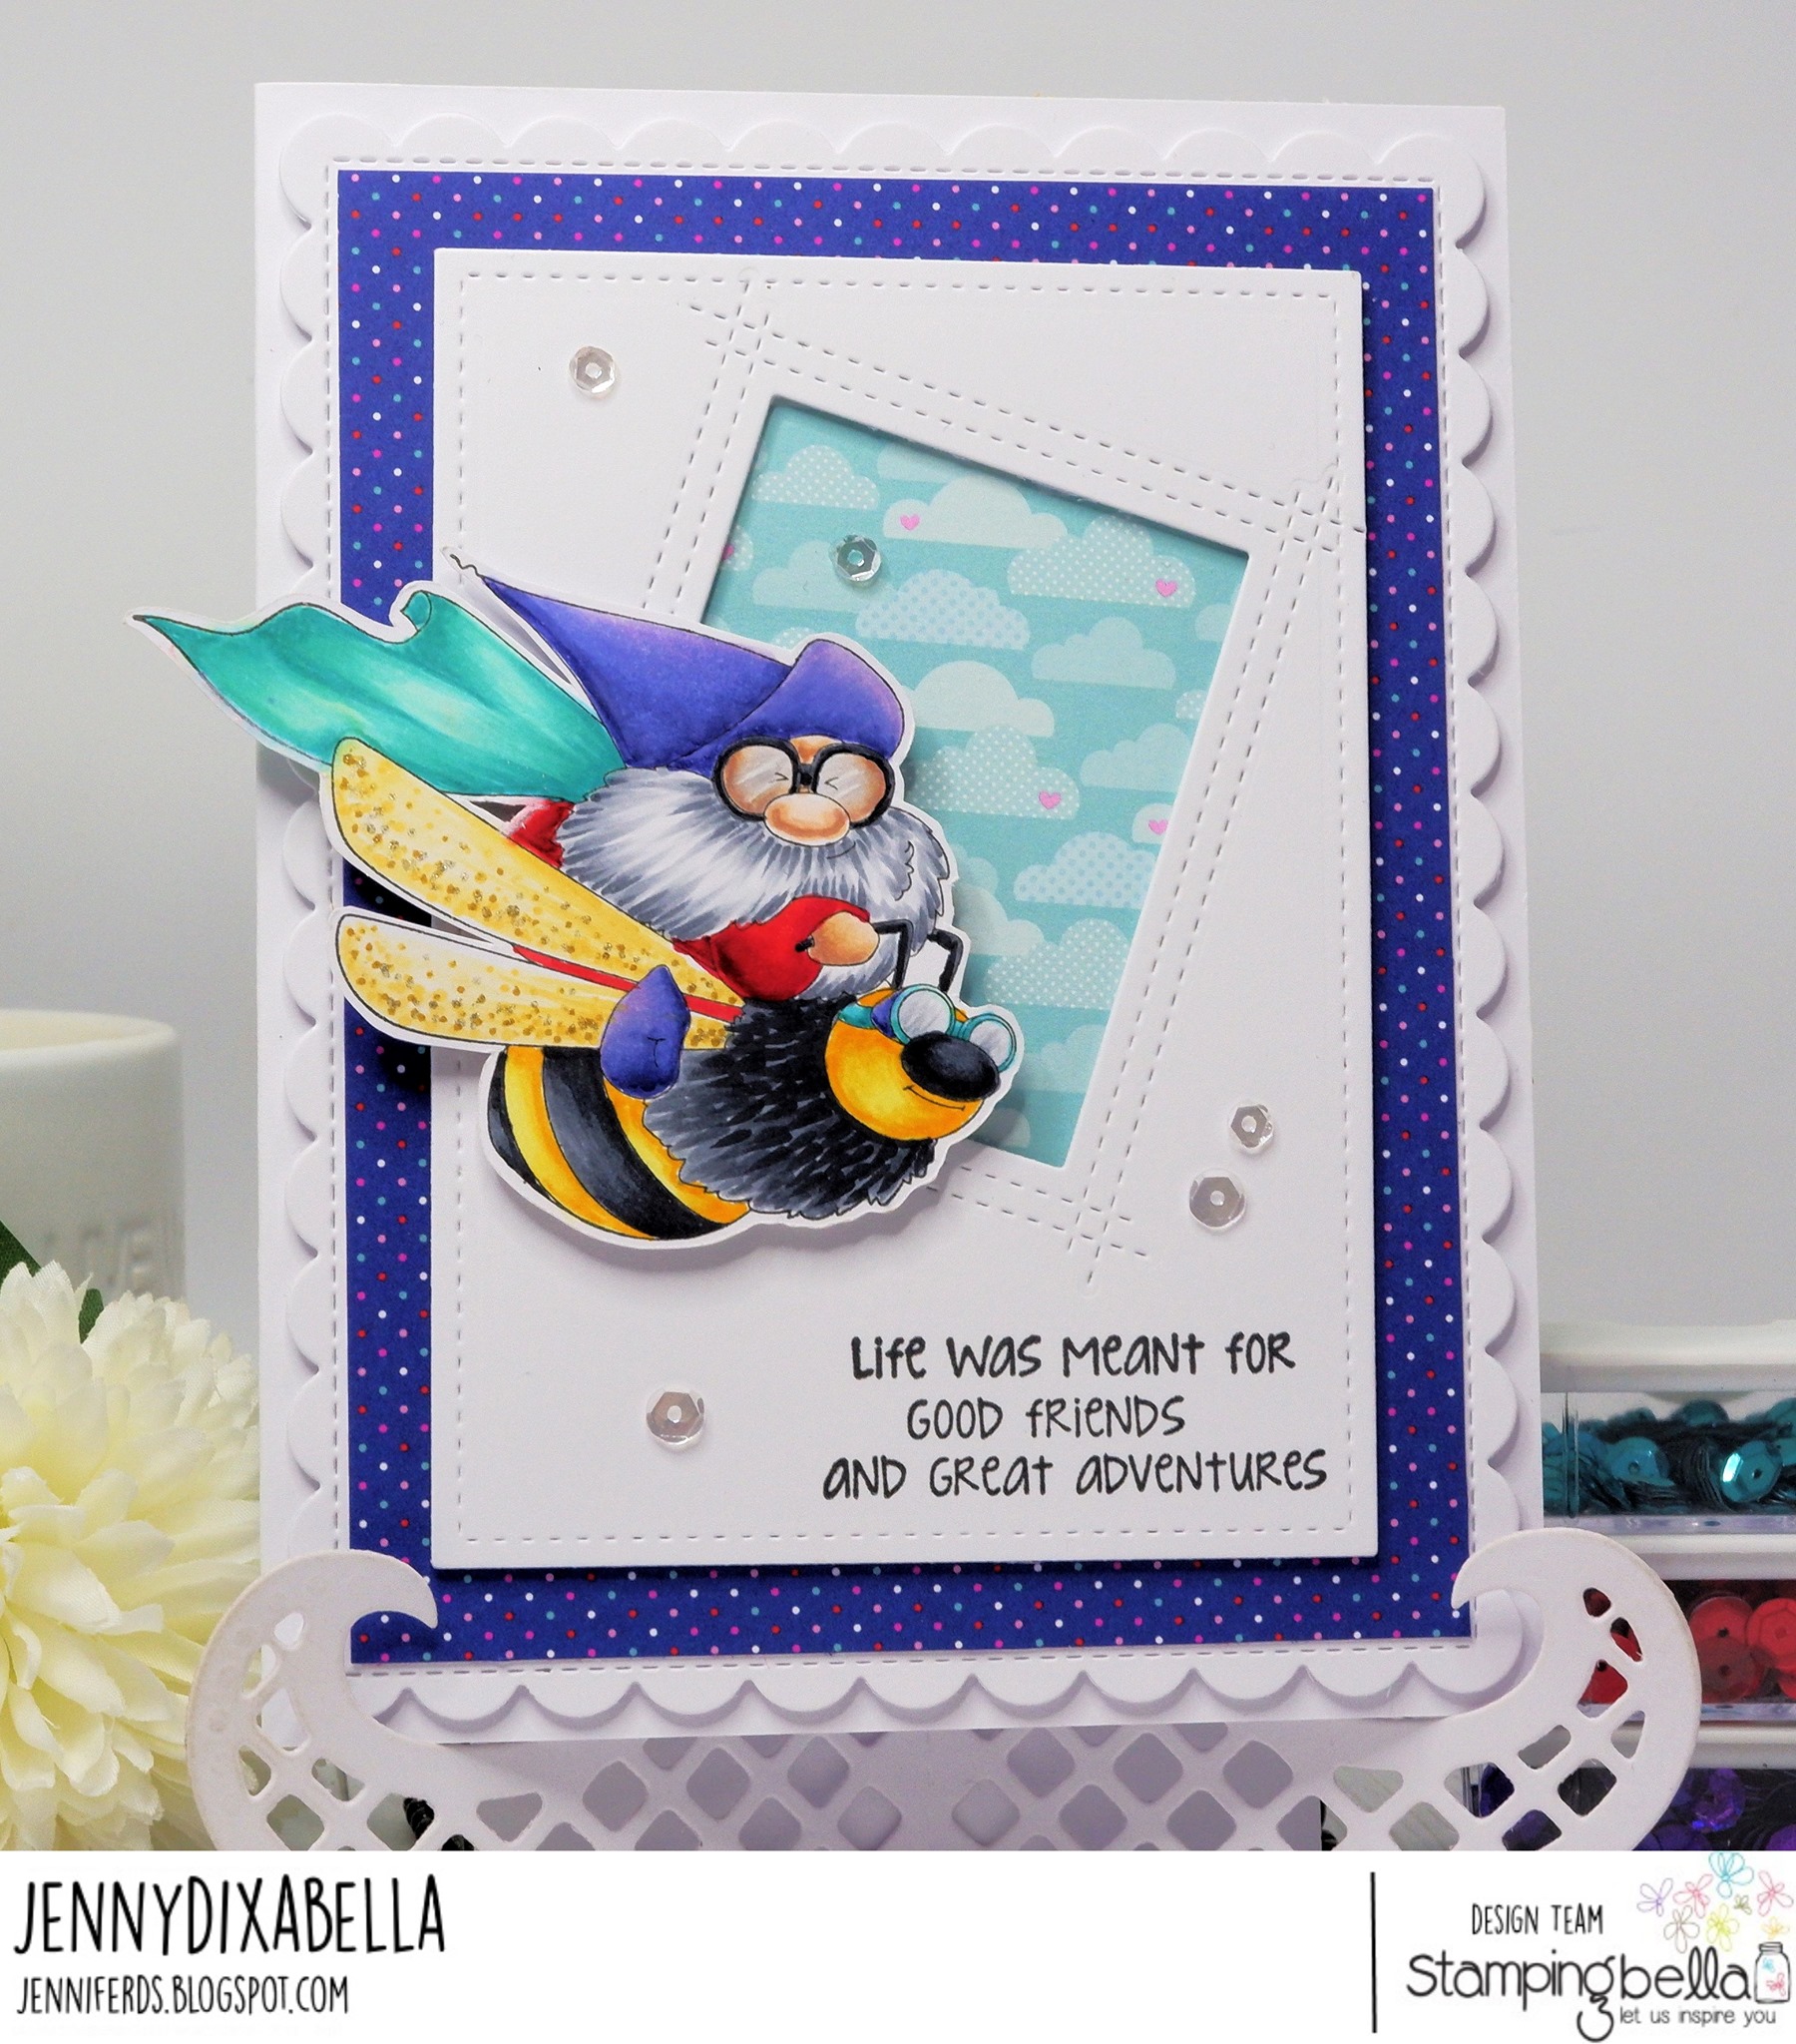 www.stampingbella.com: Rubber stamp used:  FLYING GNOME. CARD By Jenny Dix